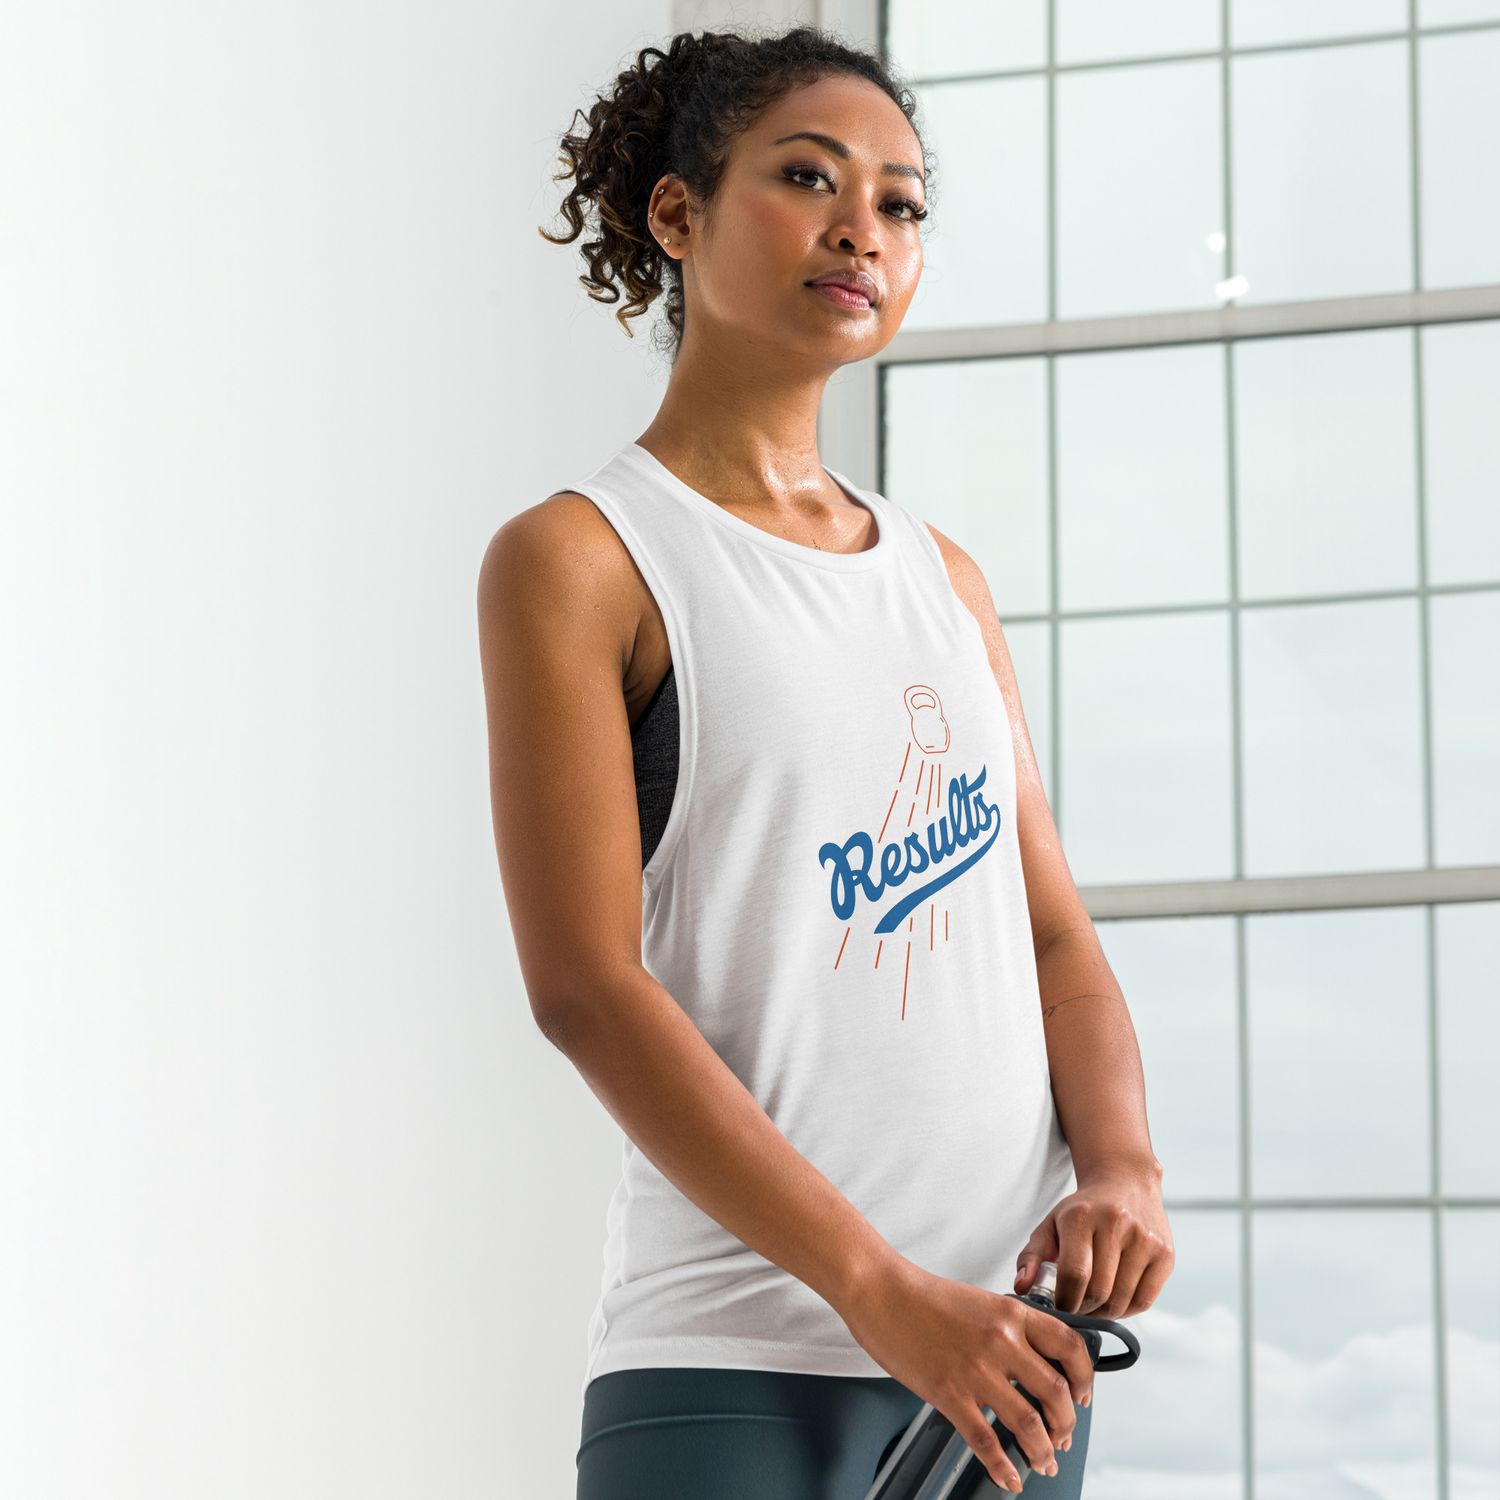 Ladies’ "Results" Muscle Tank